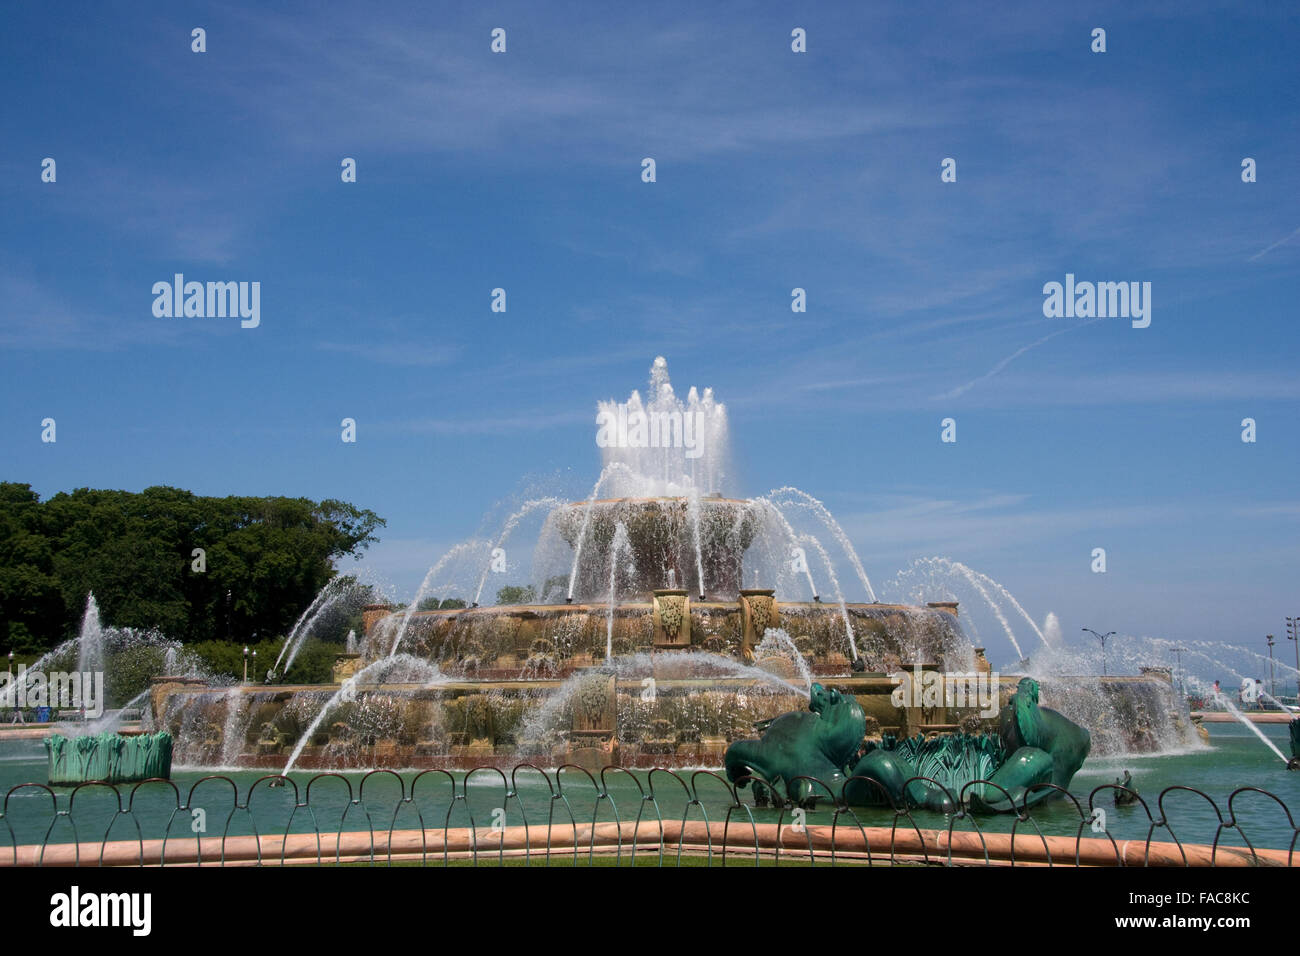 Clarence Buckingham Memorial Fountain. Chicago. Banque D'Images